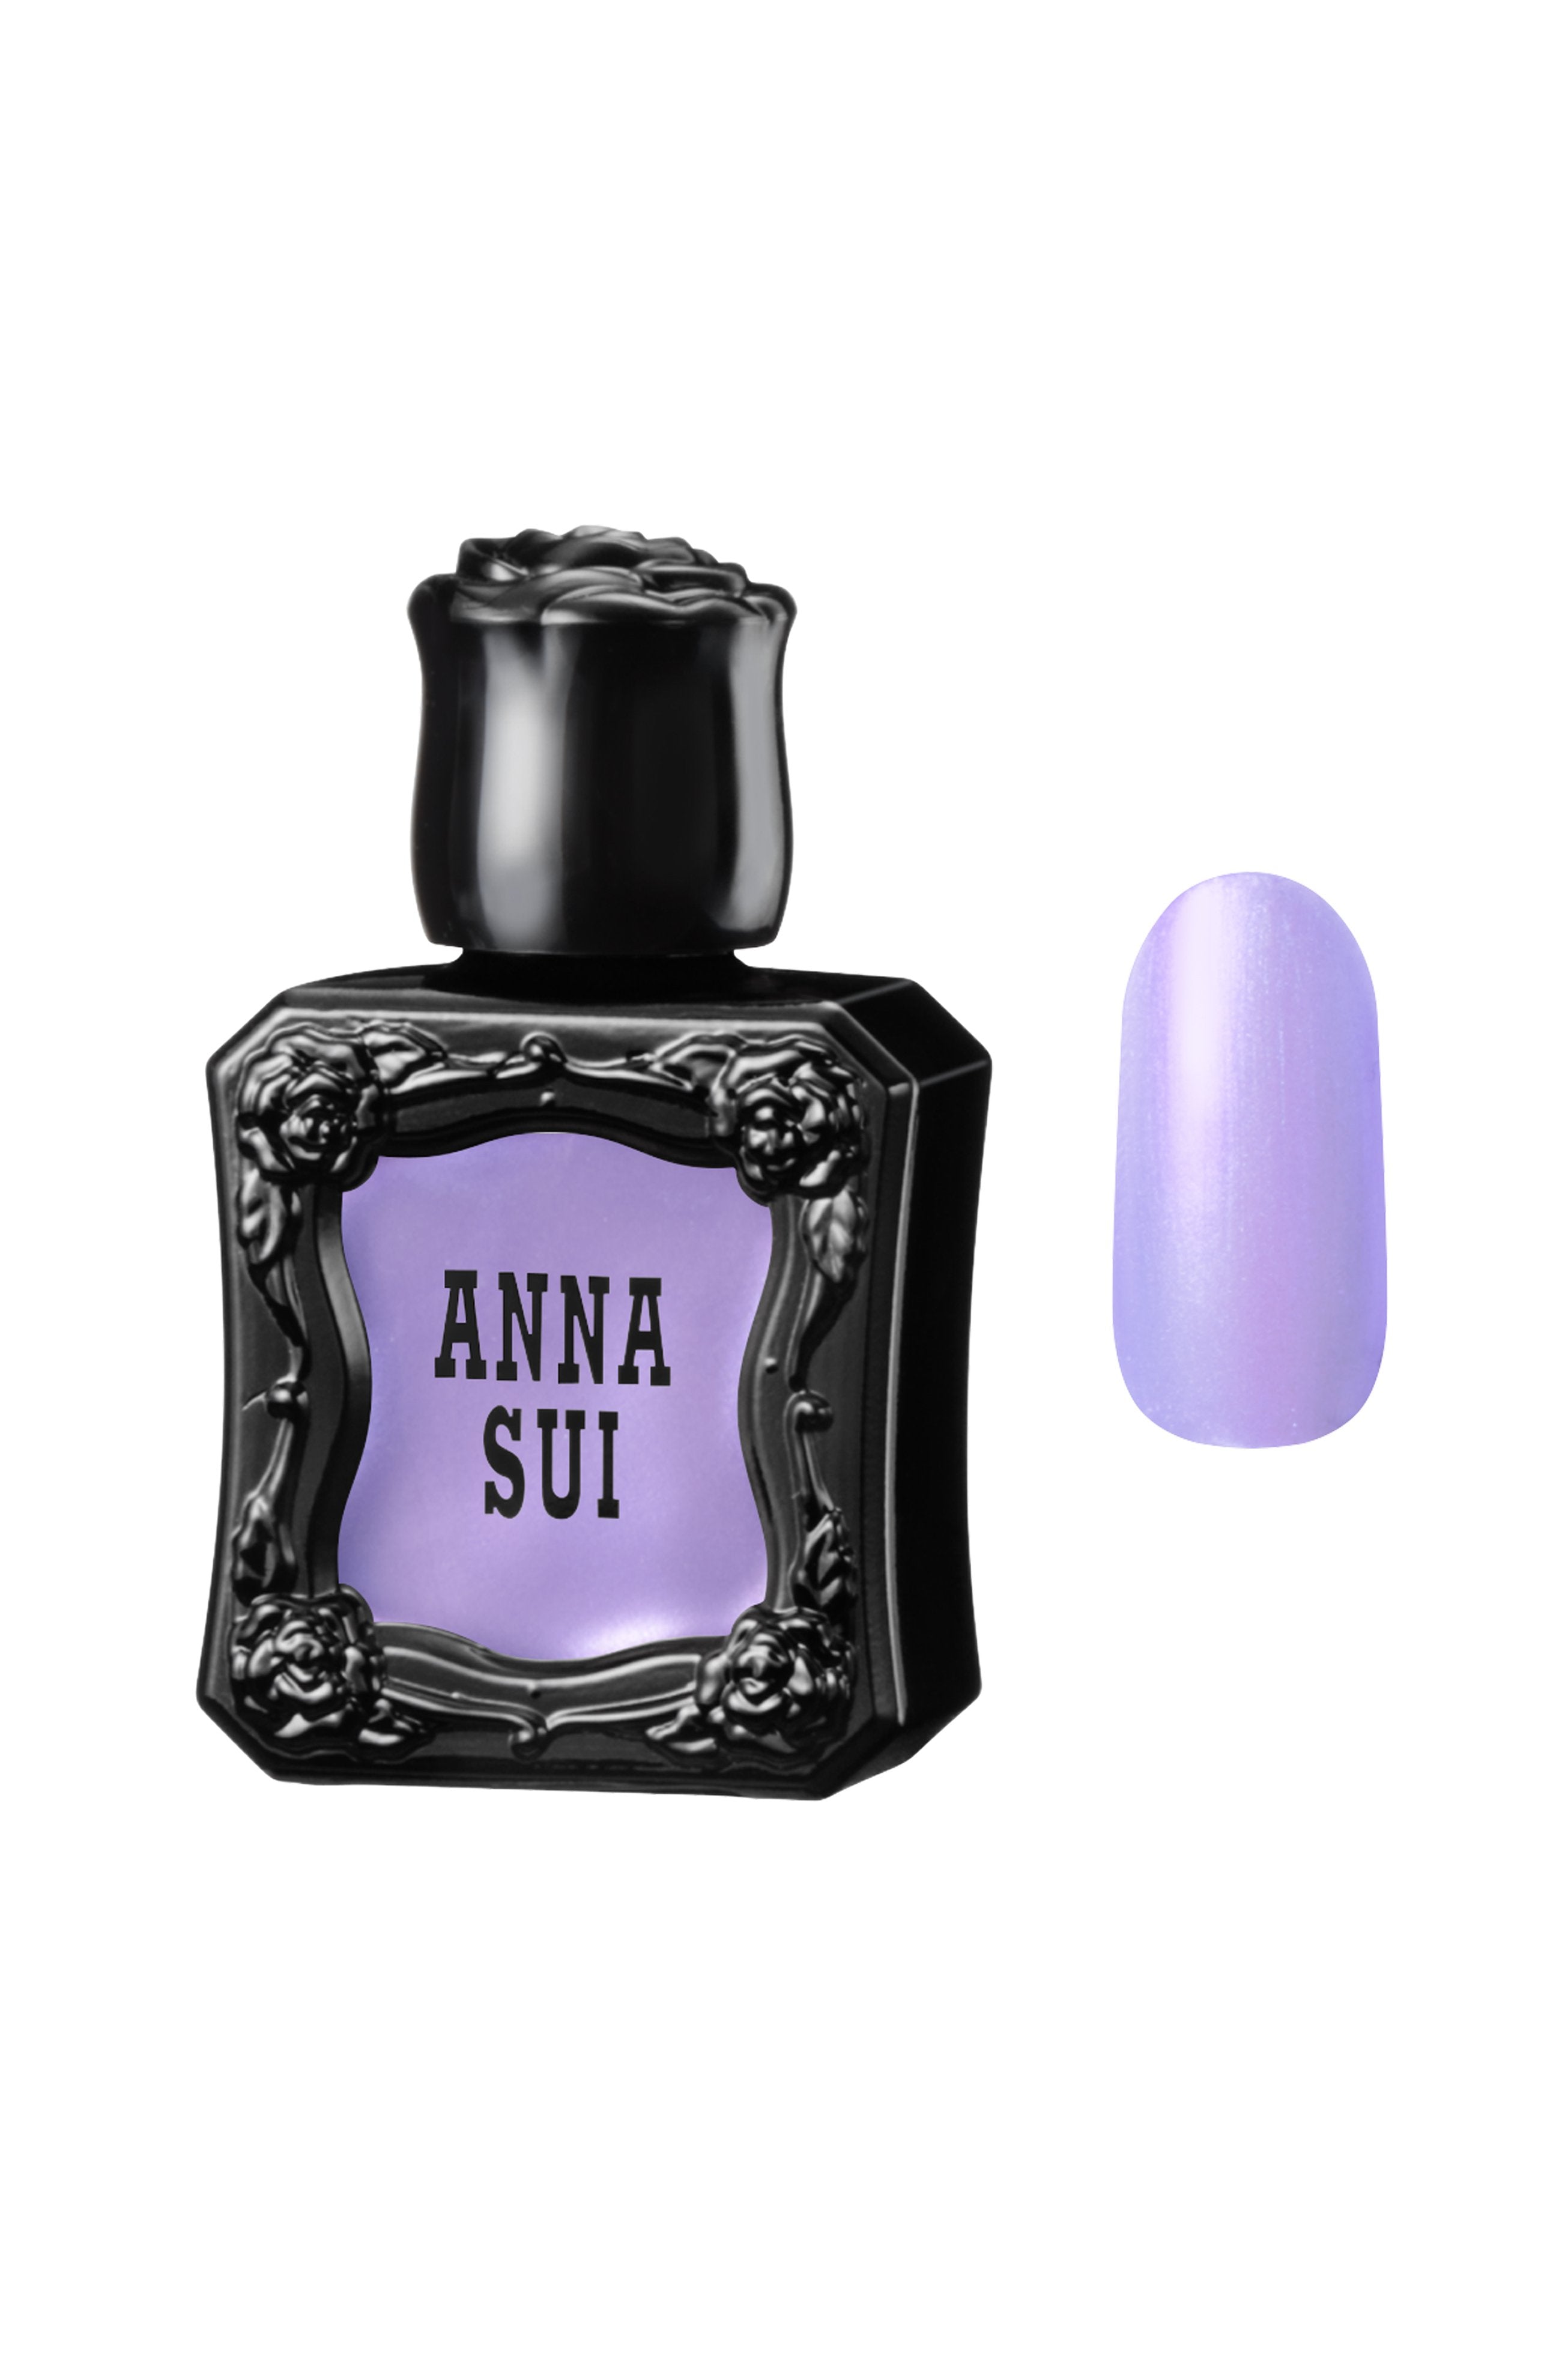 IRIDESCENT PURPLE Nail Polish bottles, with raised rose pattern, Anna Sui in black over nail colors in bottle front